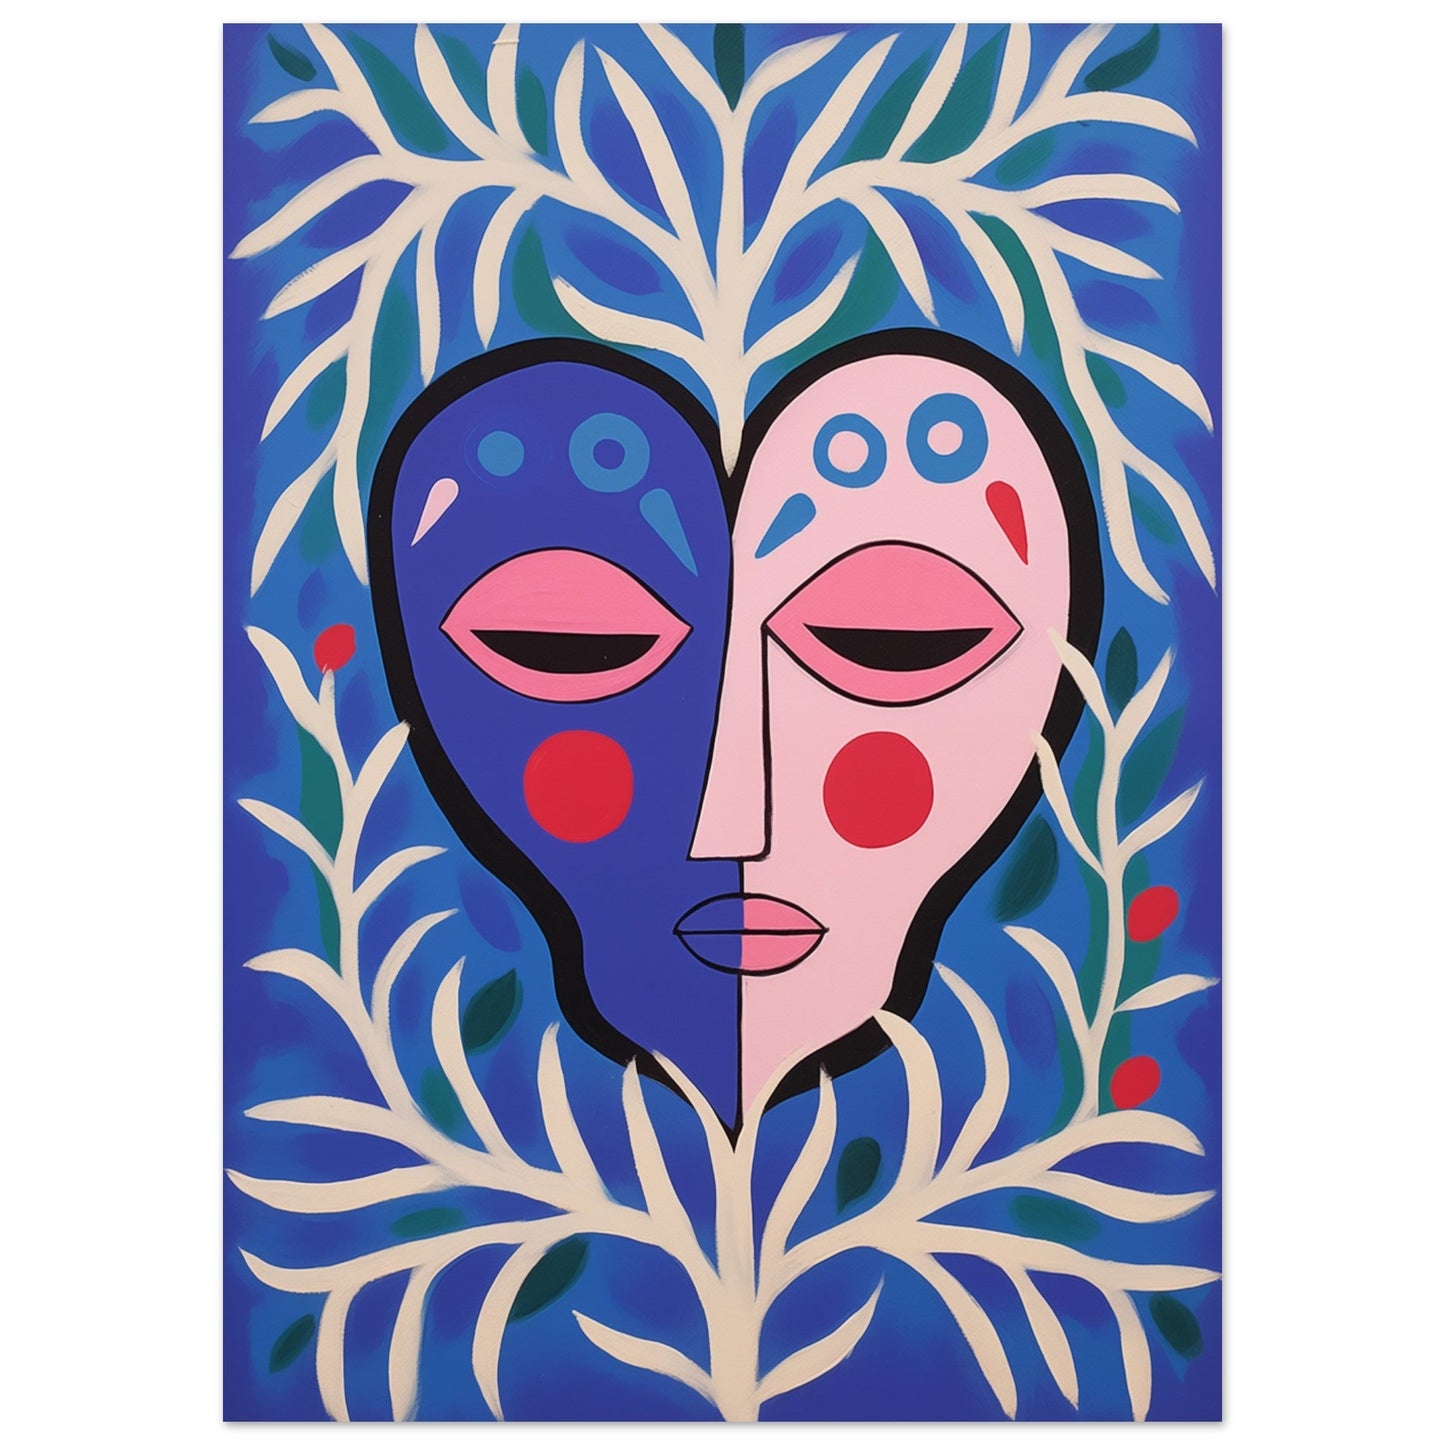 A Harmony in Duality wall art featuring a tree-shaped painting with two faces.